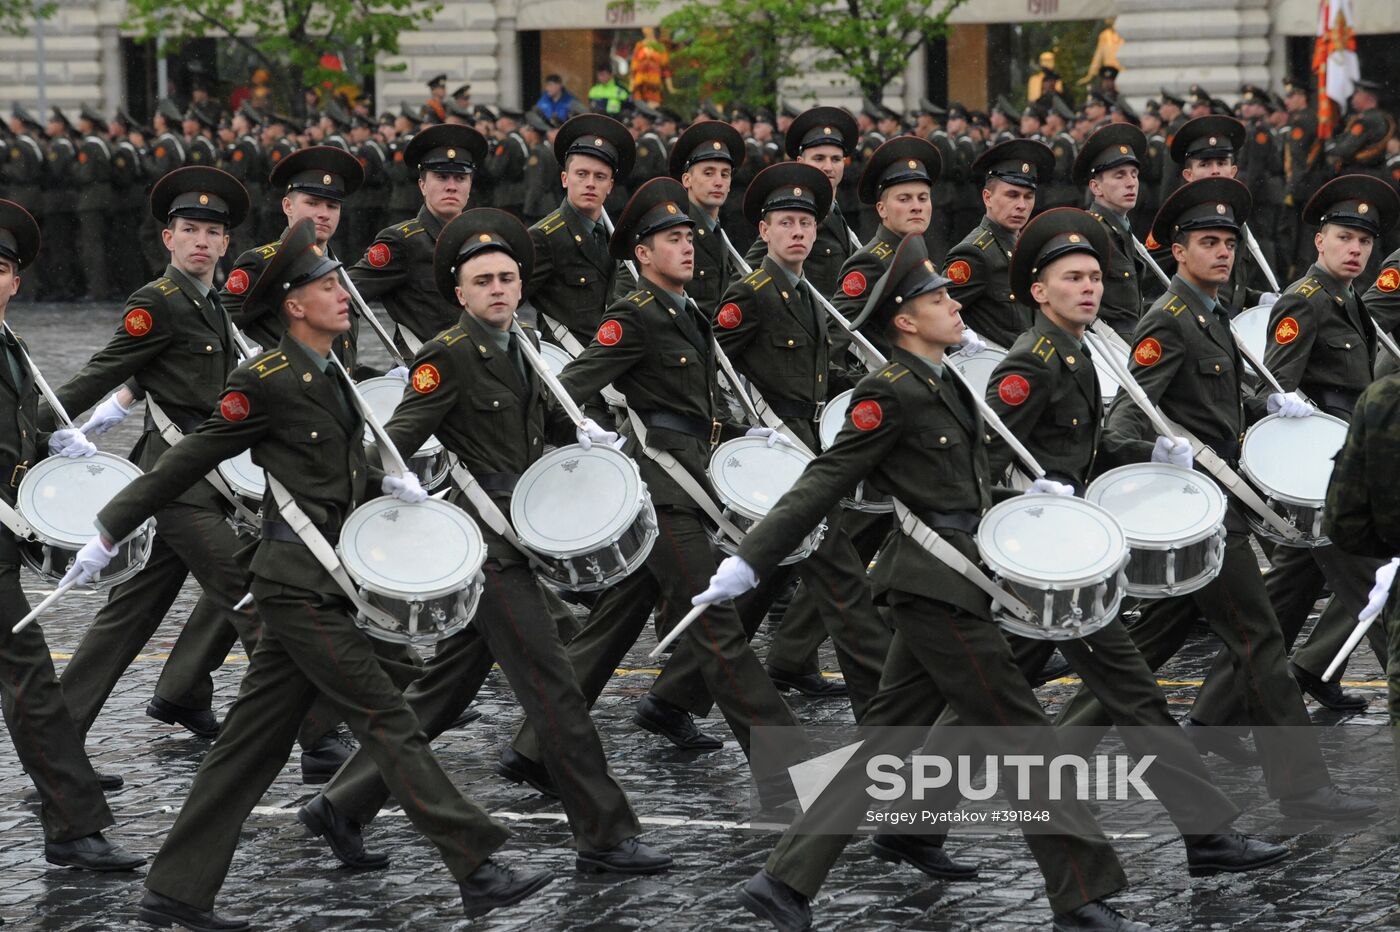 Dress rehearsal of the Victory Day parade in Moscow